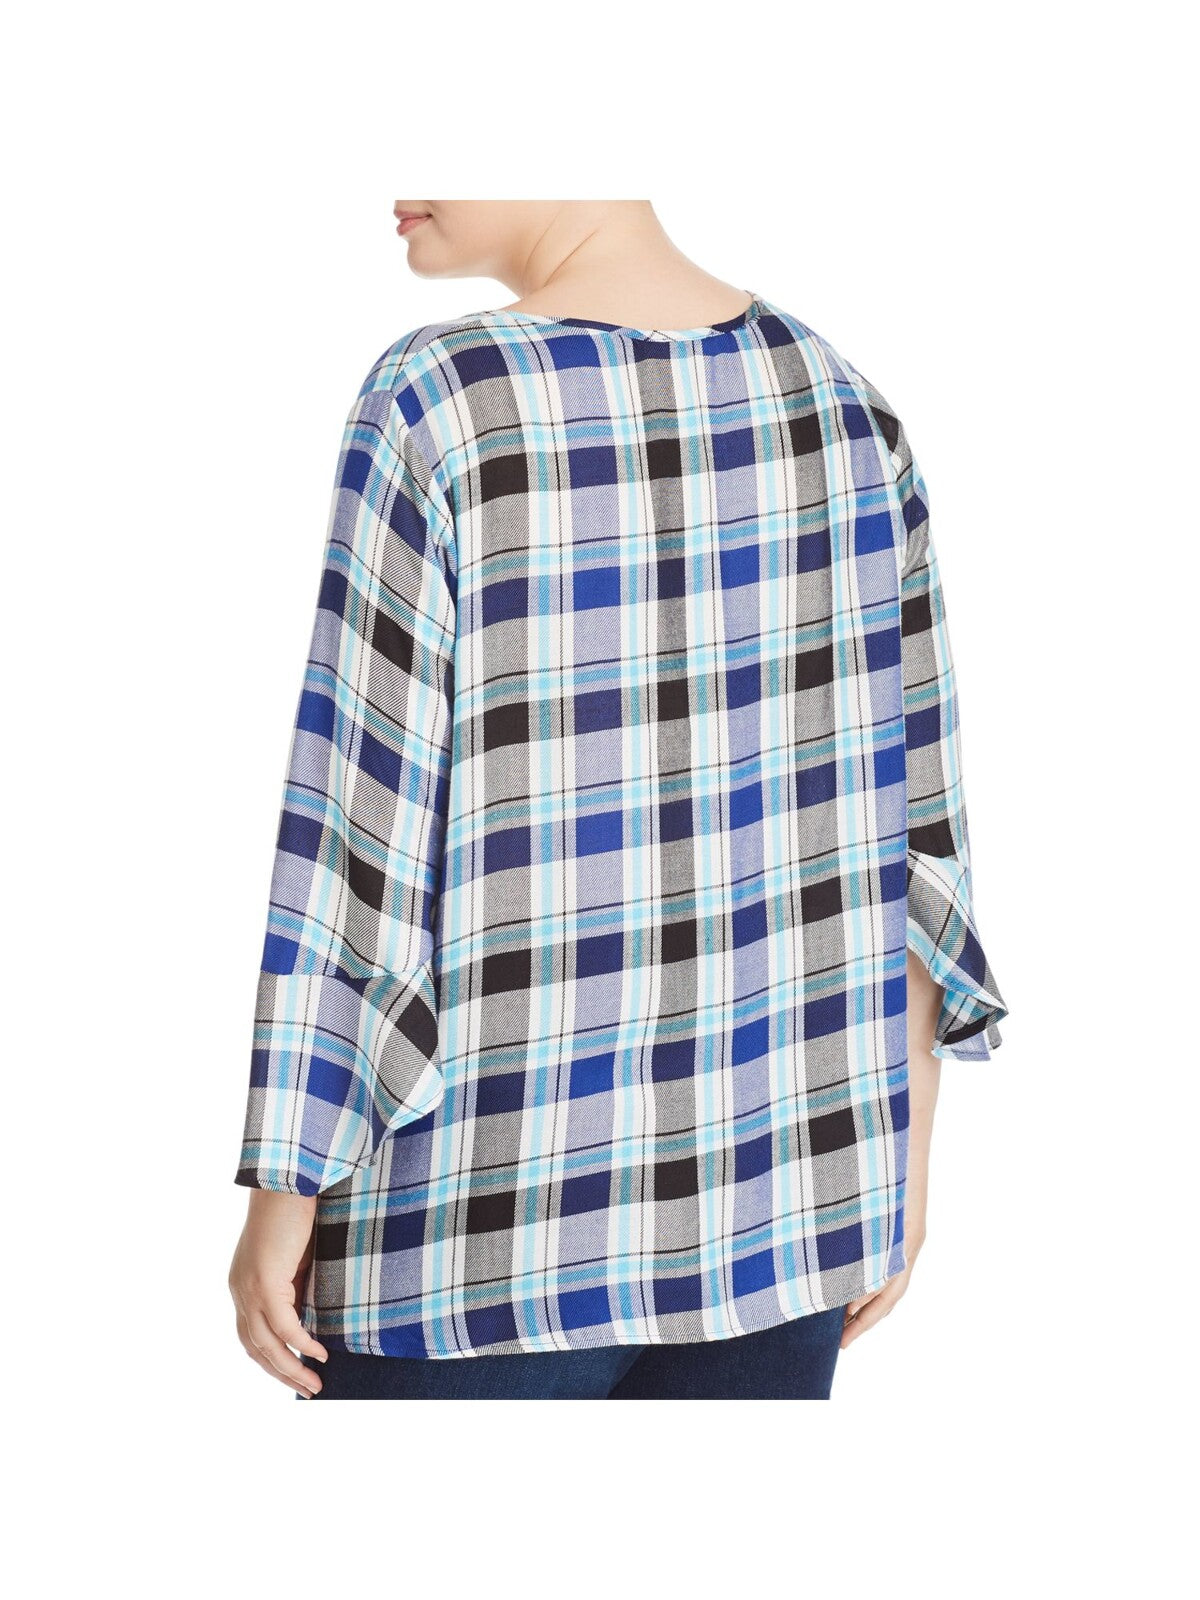 STATUS BY CHENAULT Womens Blue Ruffled Buttoned Plaid 3/4 Sleeve Split Top Plus 1X